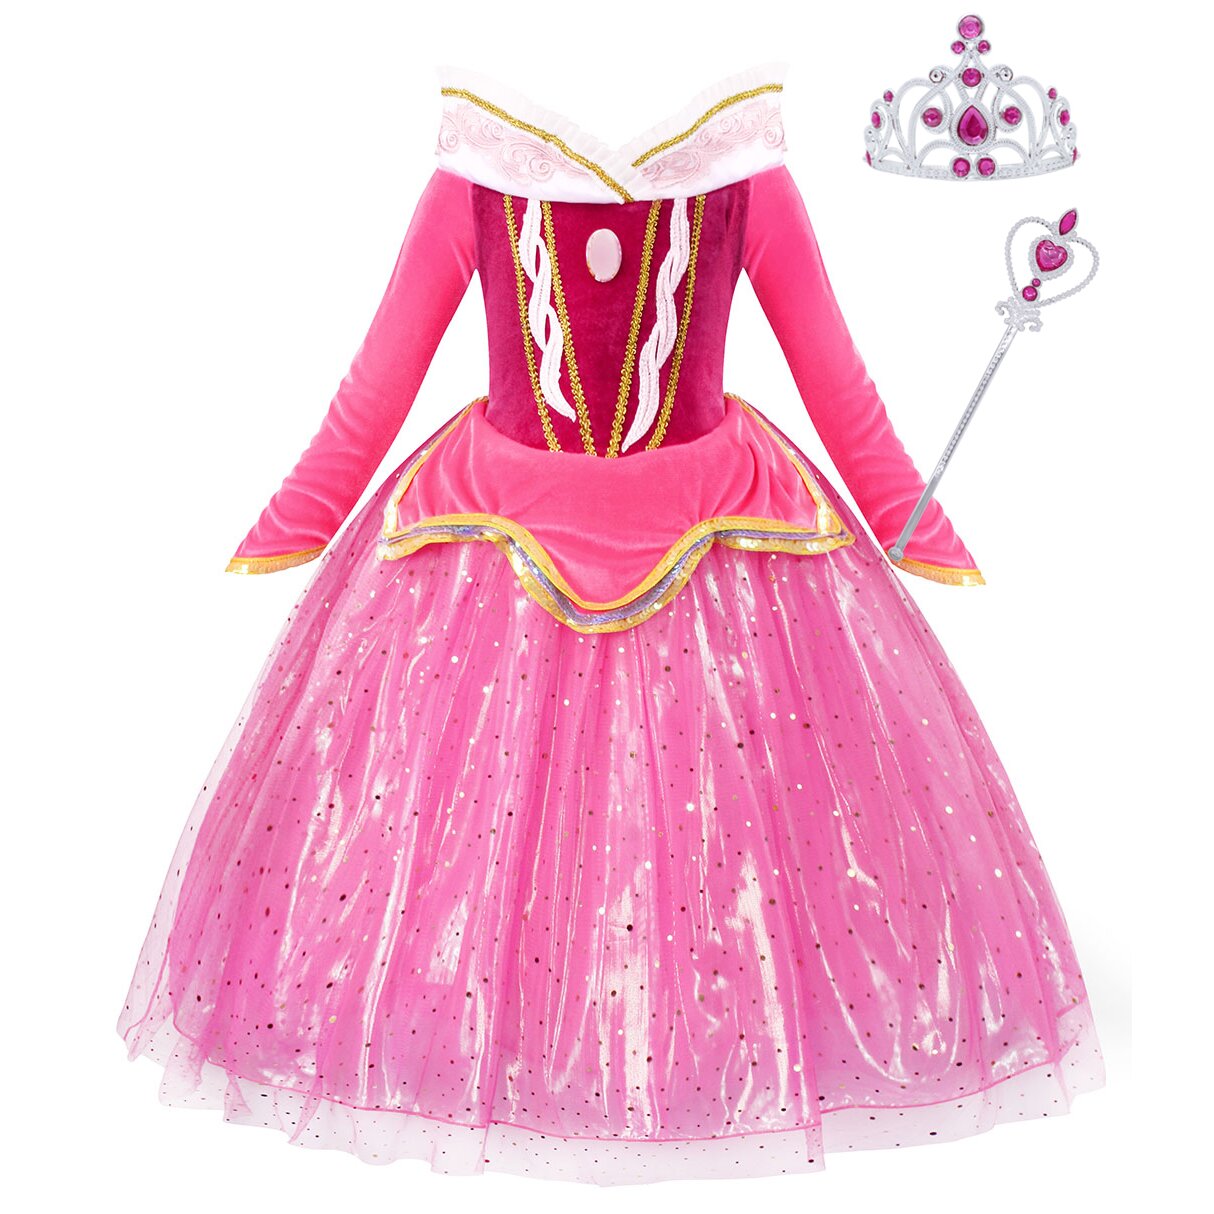 Jurebecia Aurora Dress for Girls Costume Girls Princess Dress Outfit Halloween Birthday Party Carnival Cosplay Party Dress up Fancy Dresses Rose Red